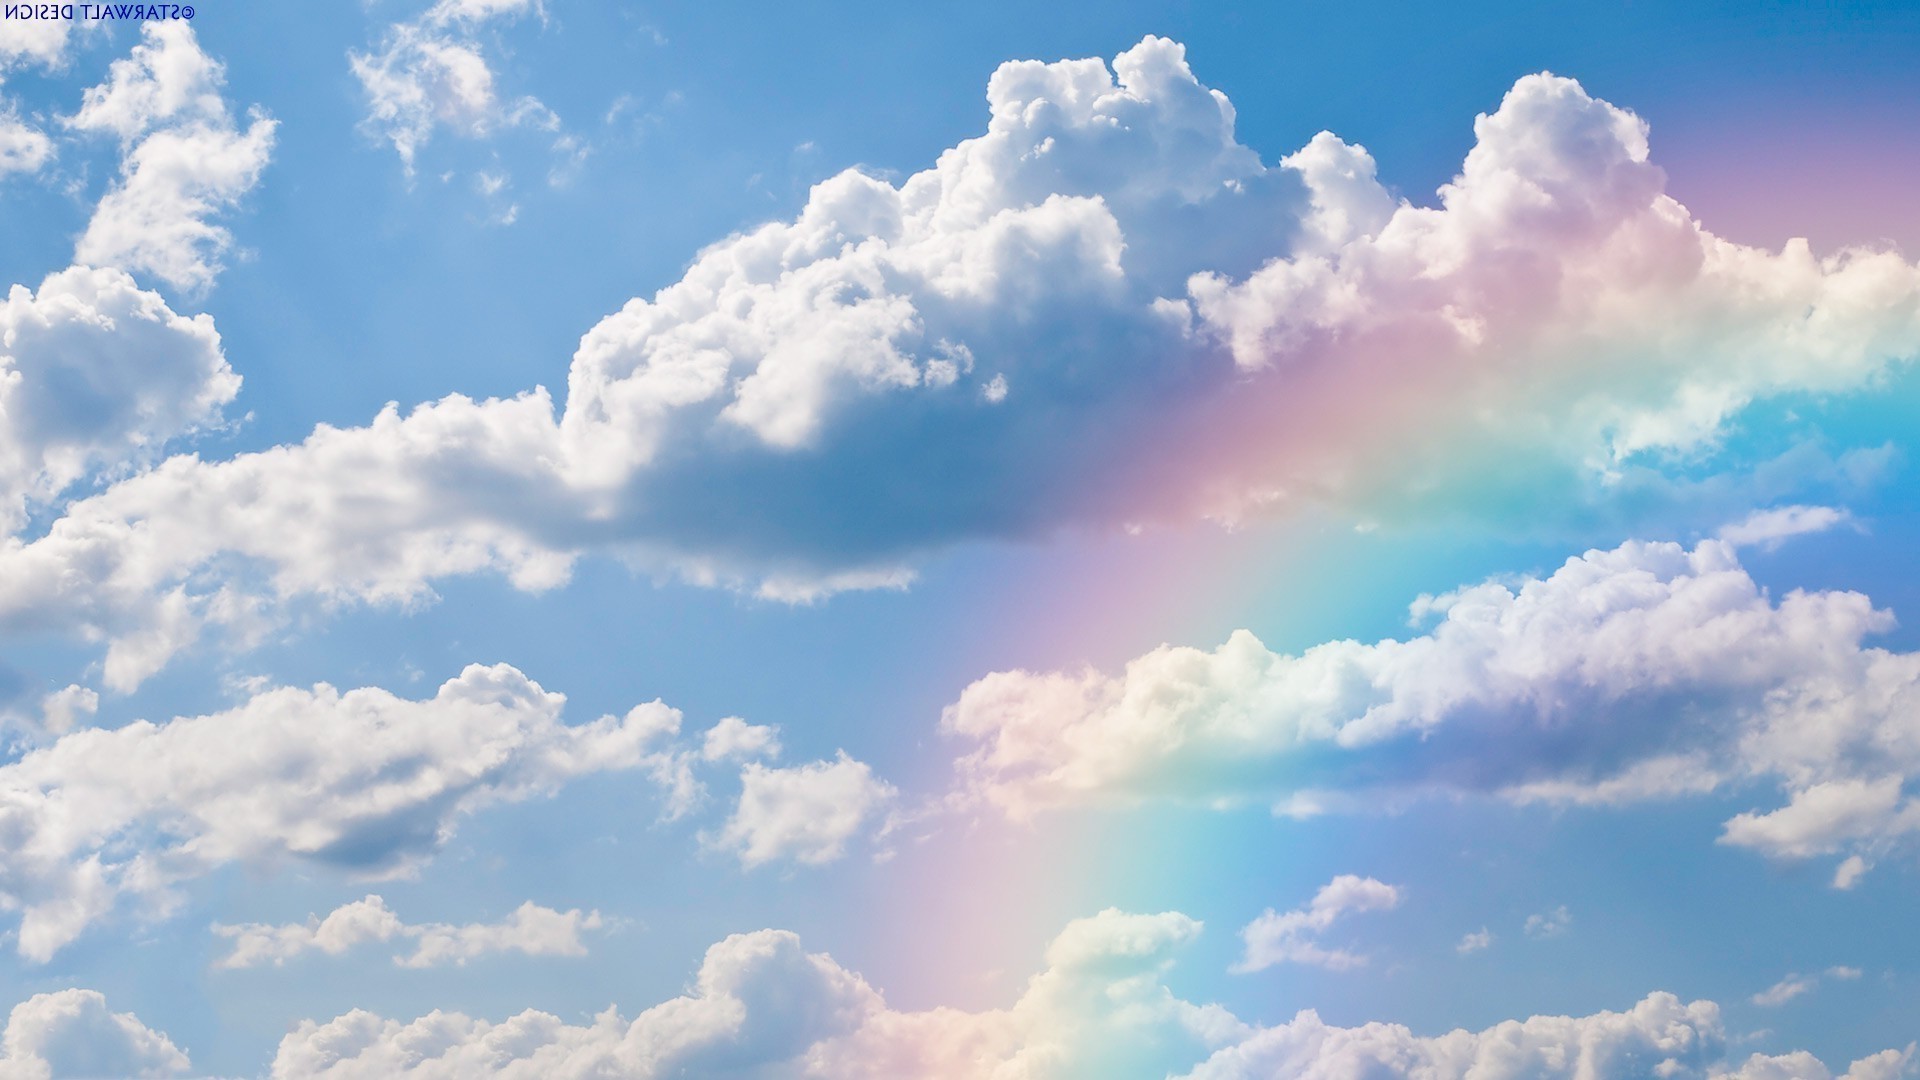 Rainbow in the clouds wallpaper   1034381